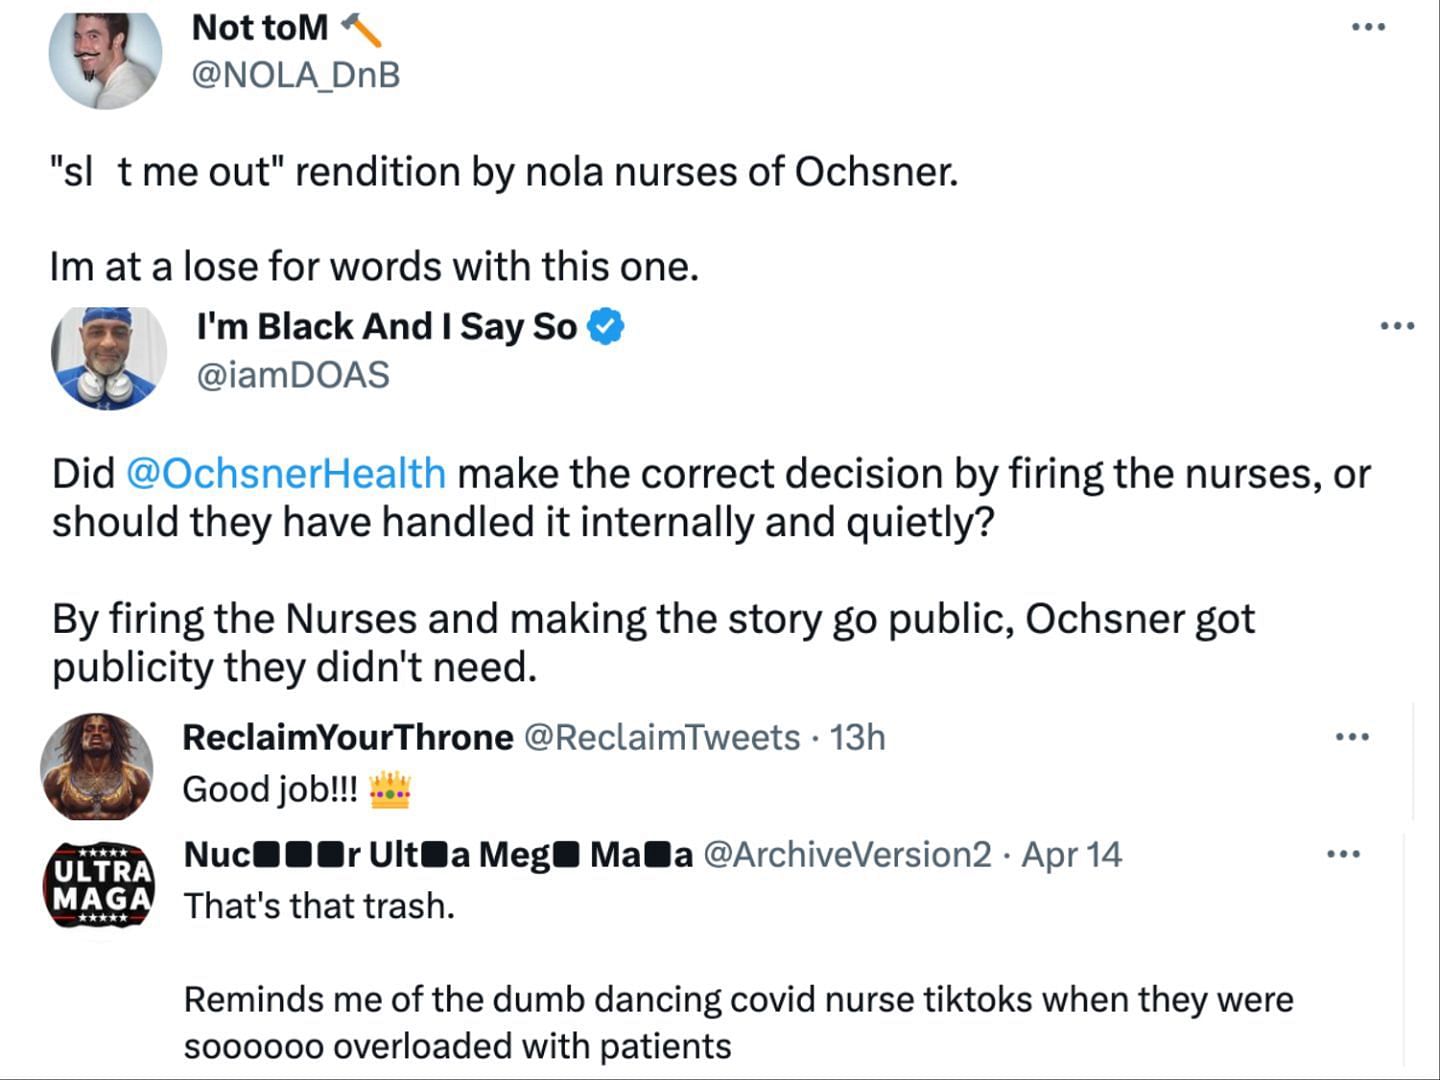 A group of nurses from Ochsner Health were fired after posting a controversial TikTok video on social media. (Image via Twitter)